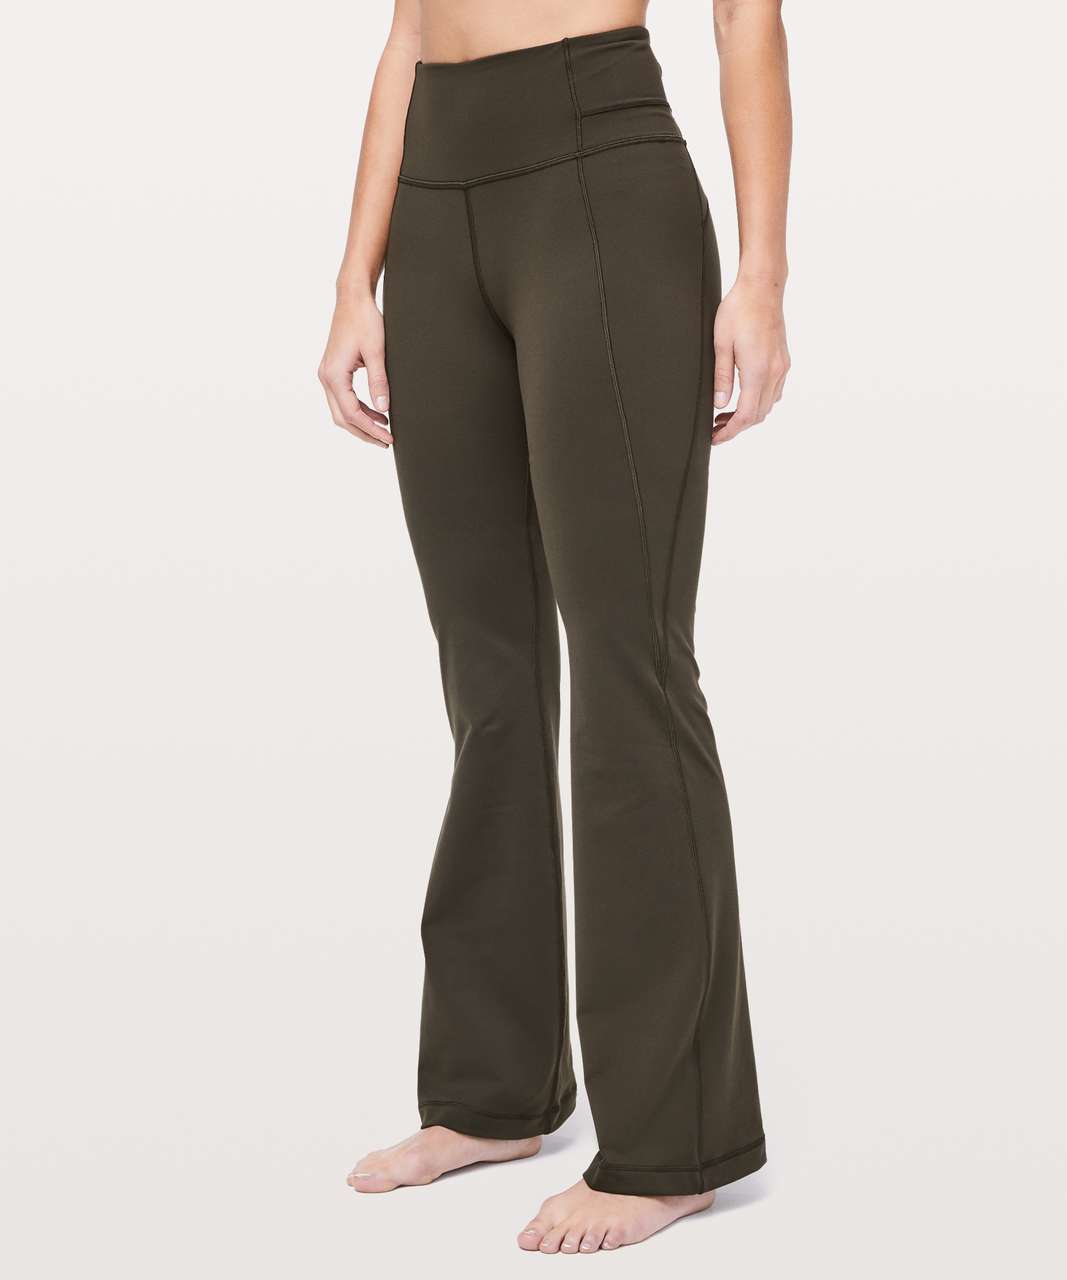 Lululemon Groove Pant Flare Luonto Furniture  International Society of  Precision Agriculture